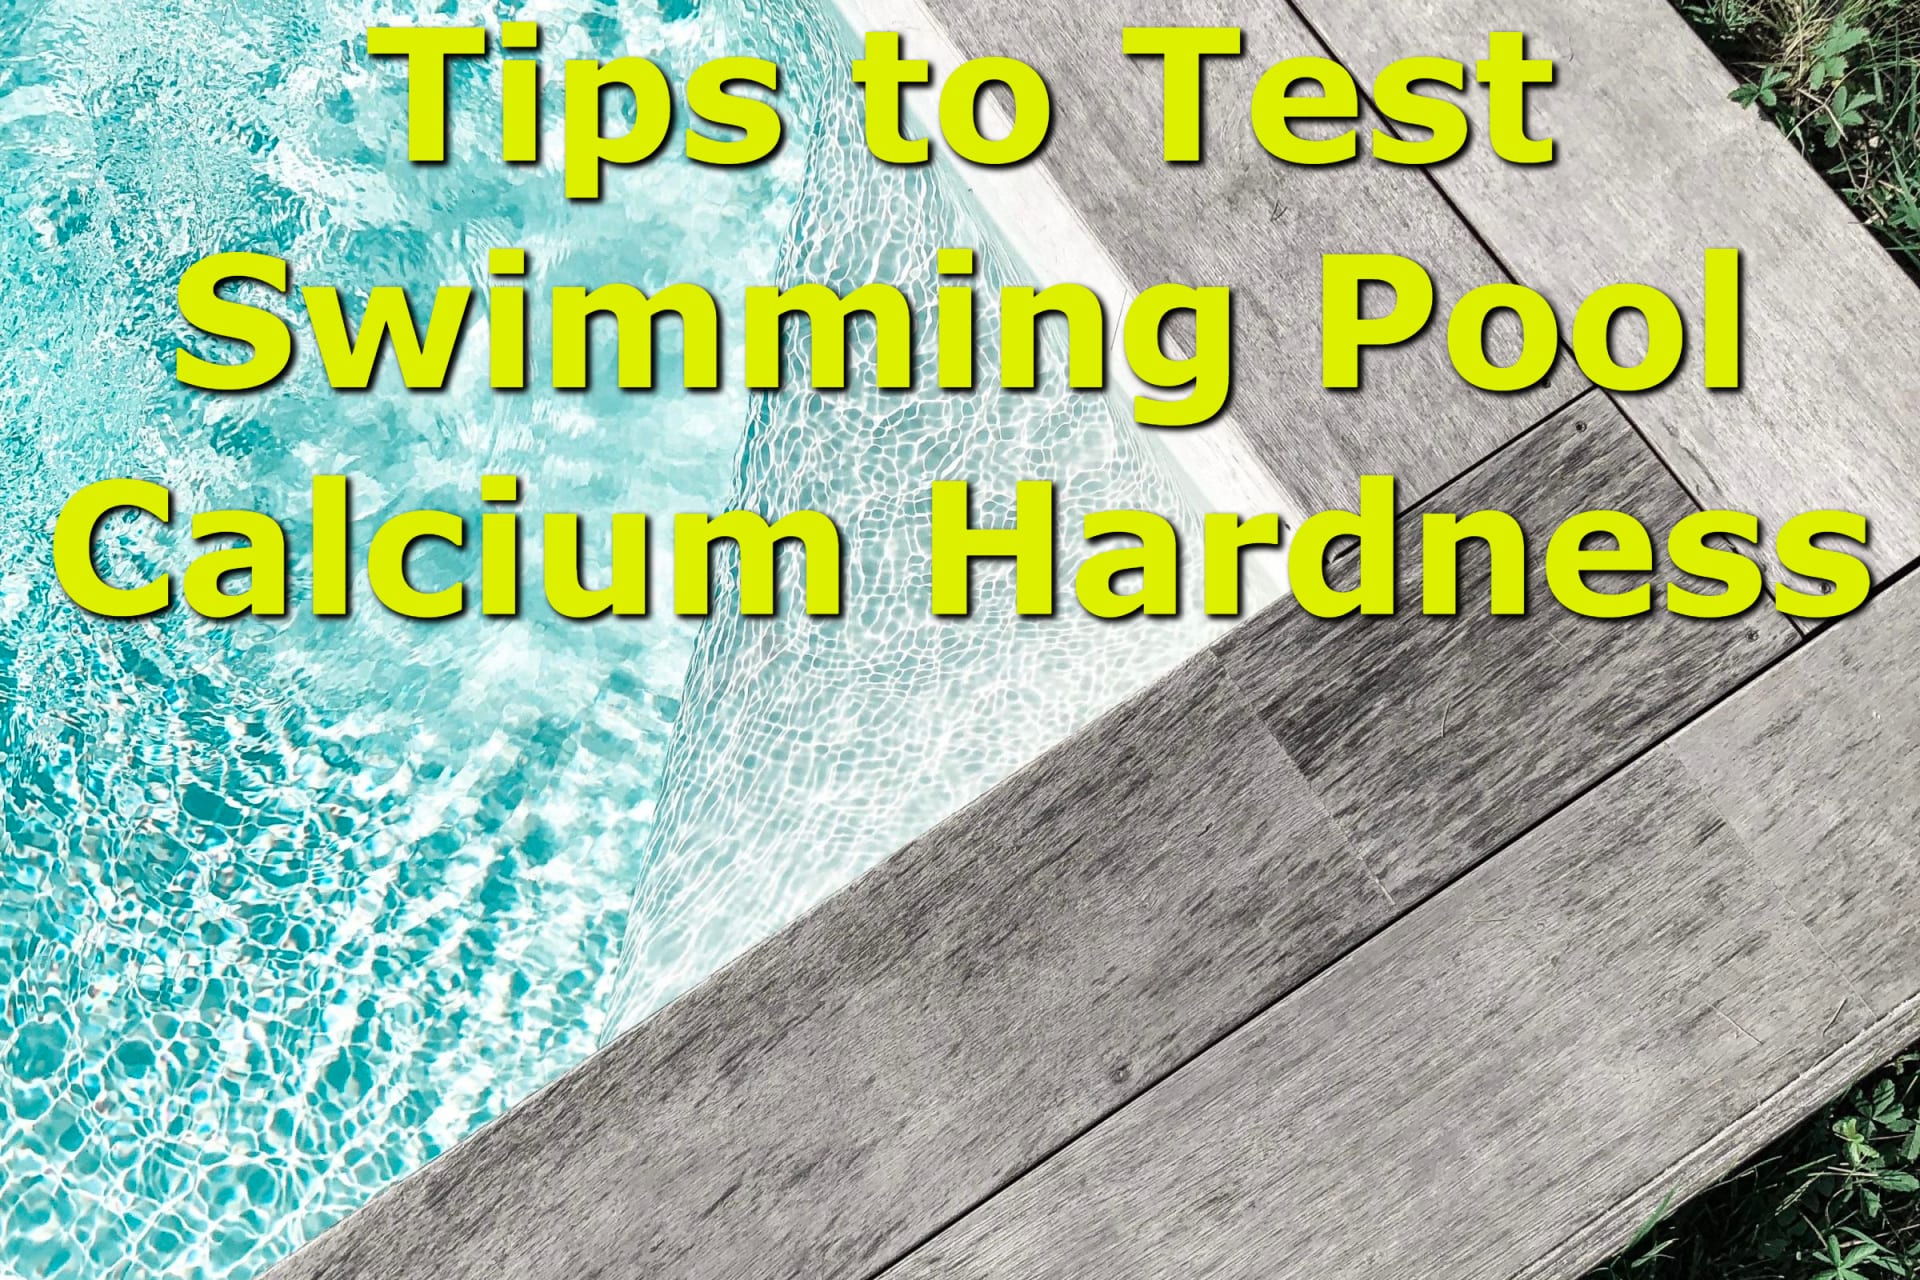 Tips to Test Swimming Pool Calcium Hardness